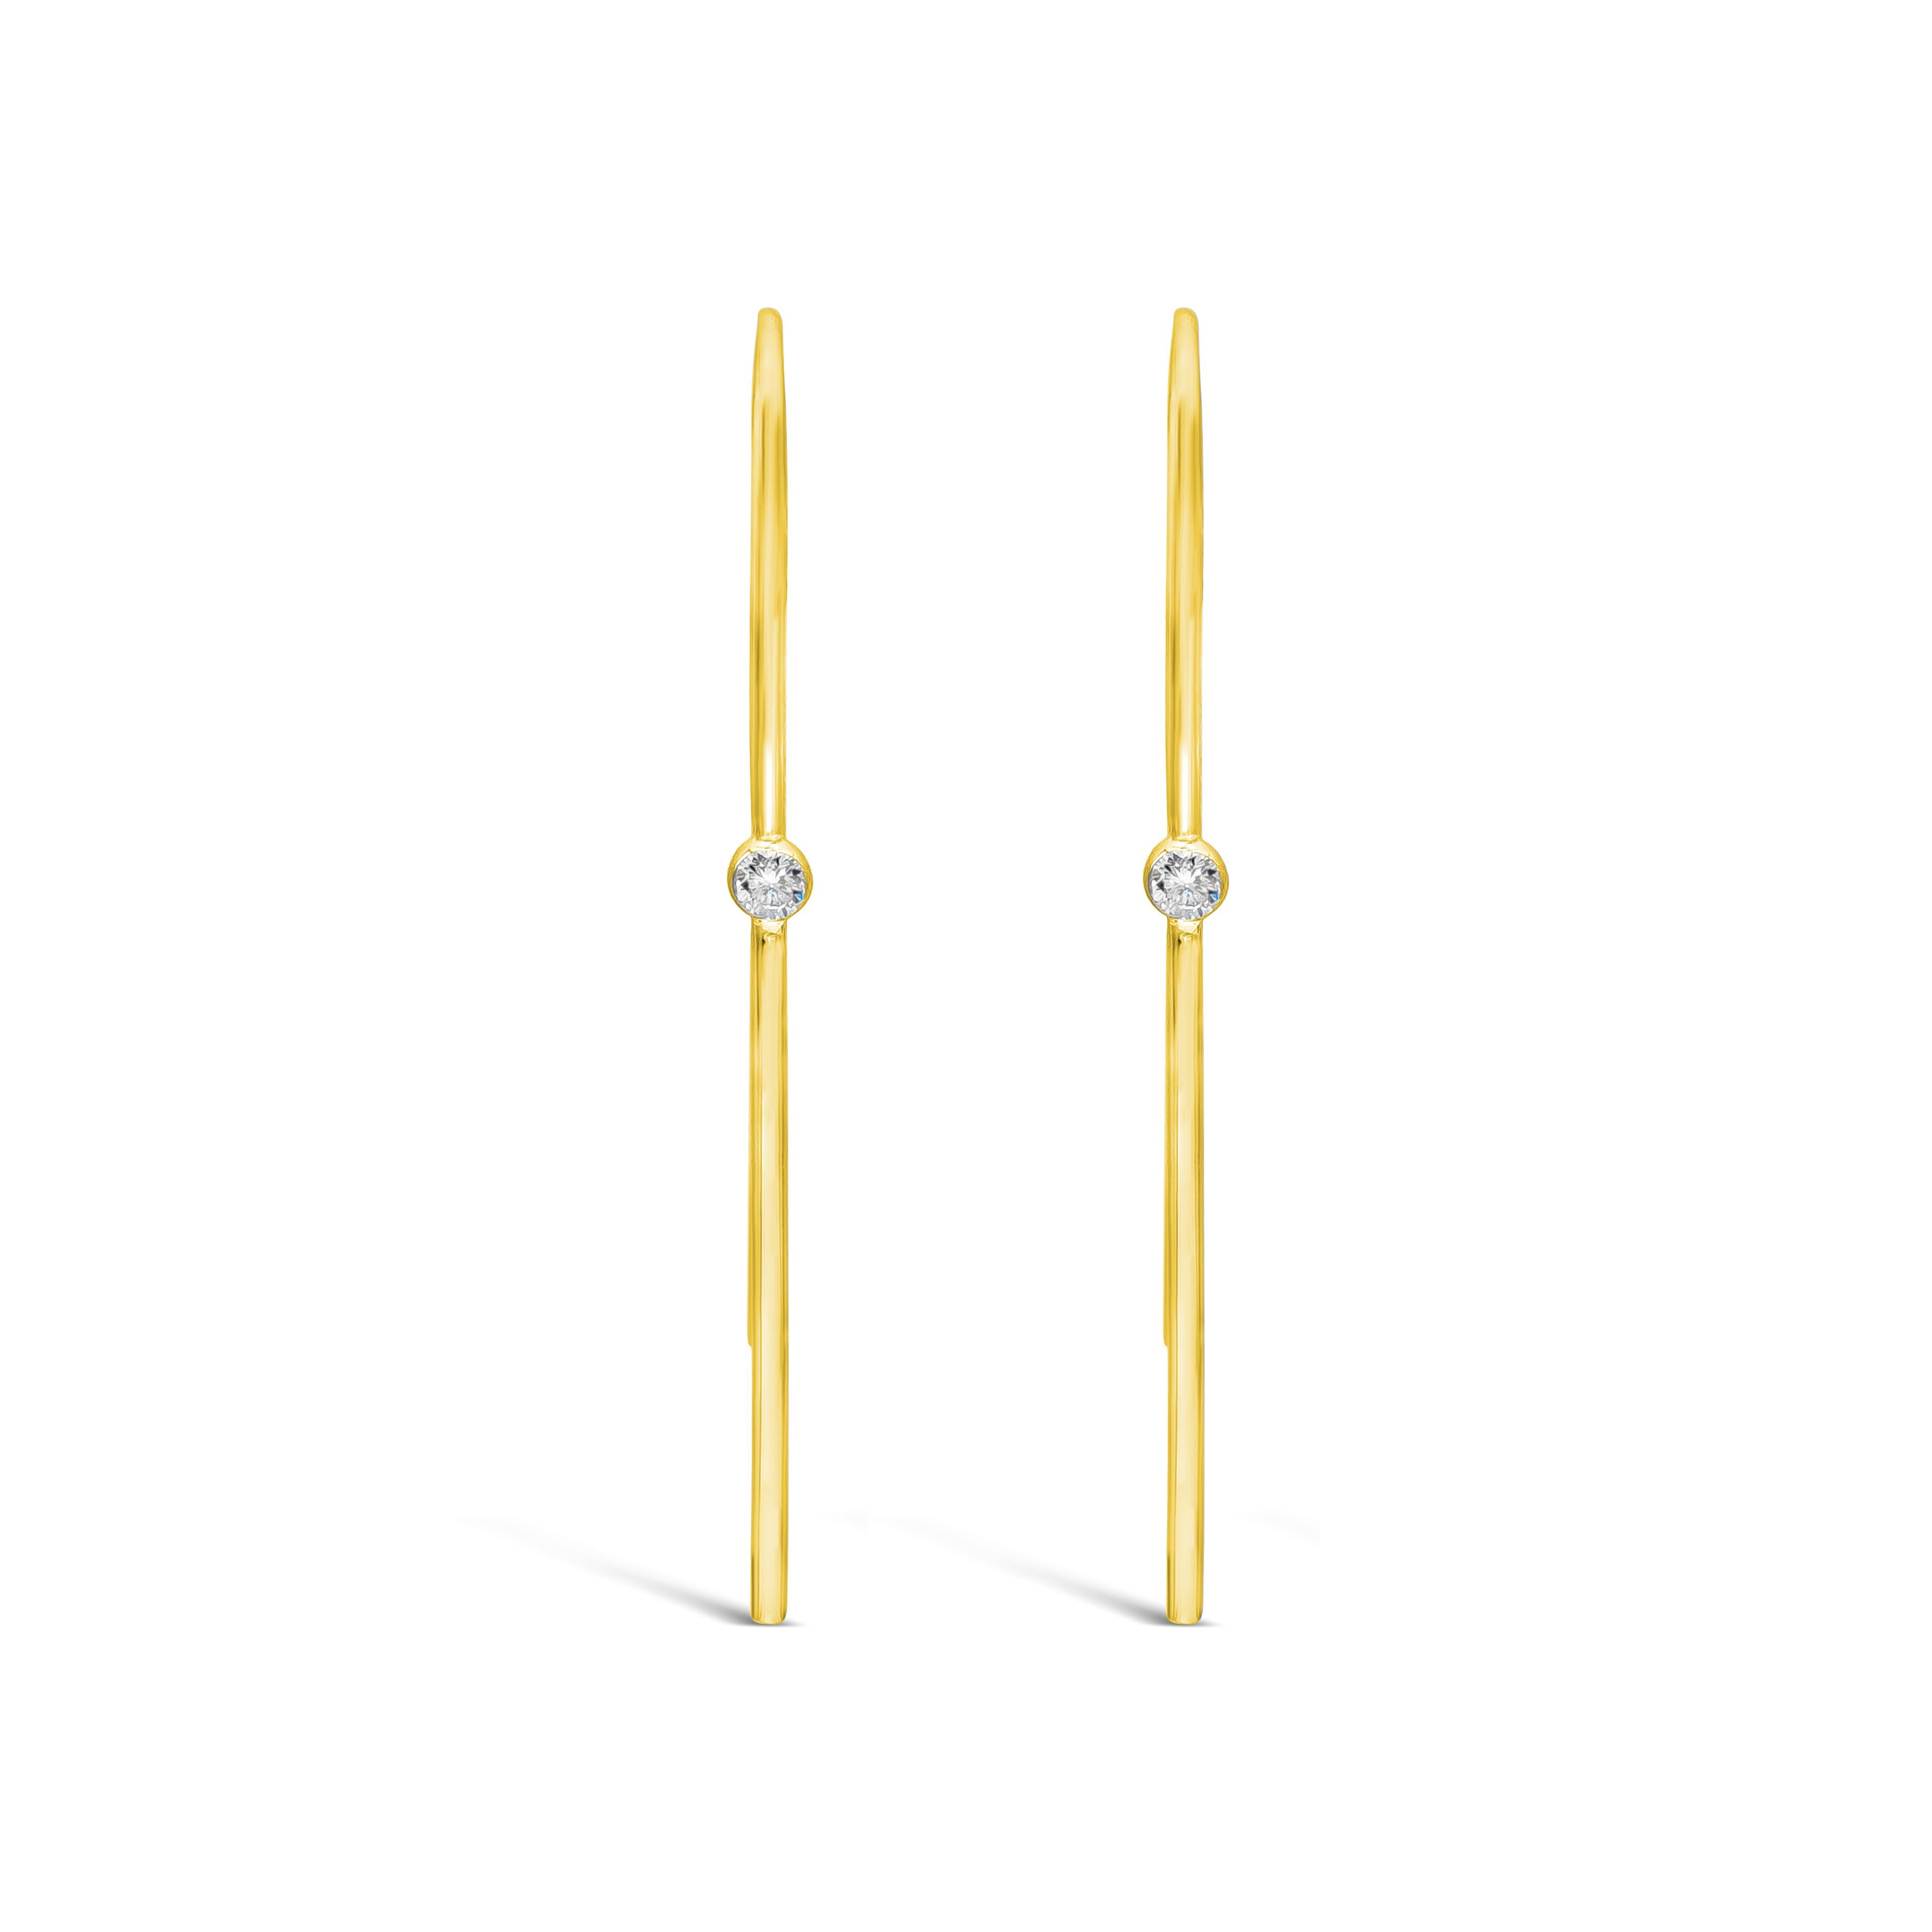 A simple and versatile solitaire invisible set fashion earring showcasing a single 0.15 carat round diamond in a 18k yellow gold bezel. F Color and VS-SI in Clarity.

Style available in different price ranges. Prices are based on your selection.